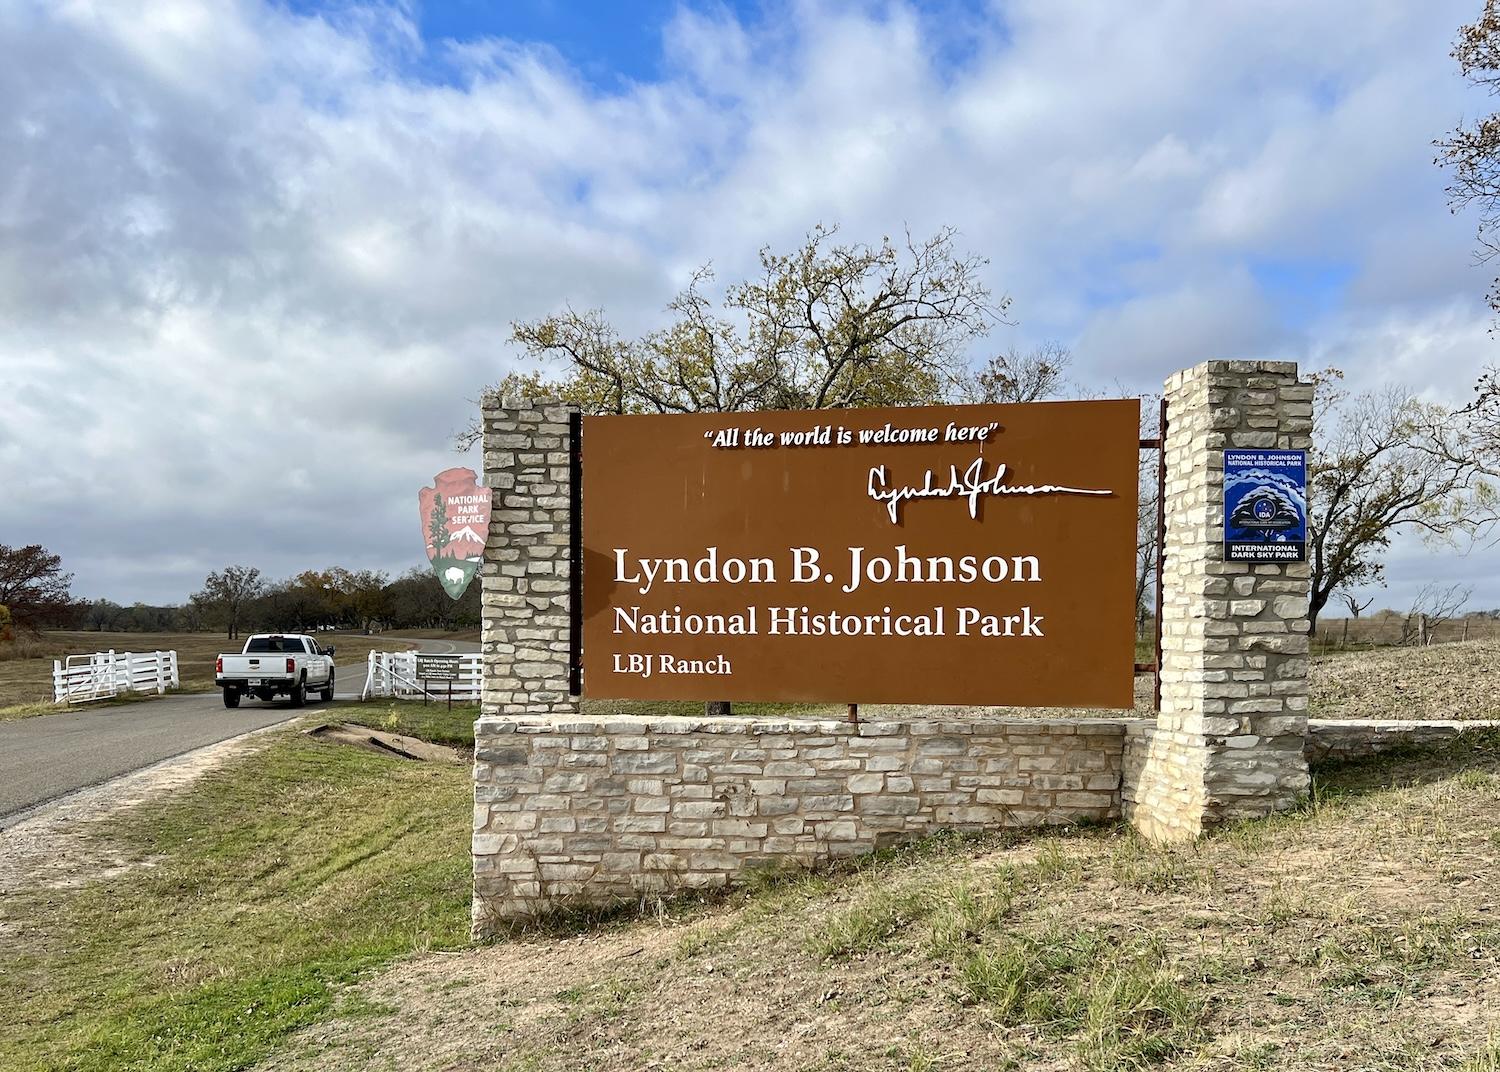 You'll drive over a cattle guard when you drive into LBJ Ranch at the Lyndon B. Johnson National Historical Park in Texas.